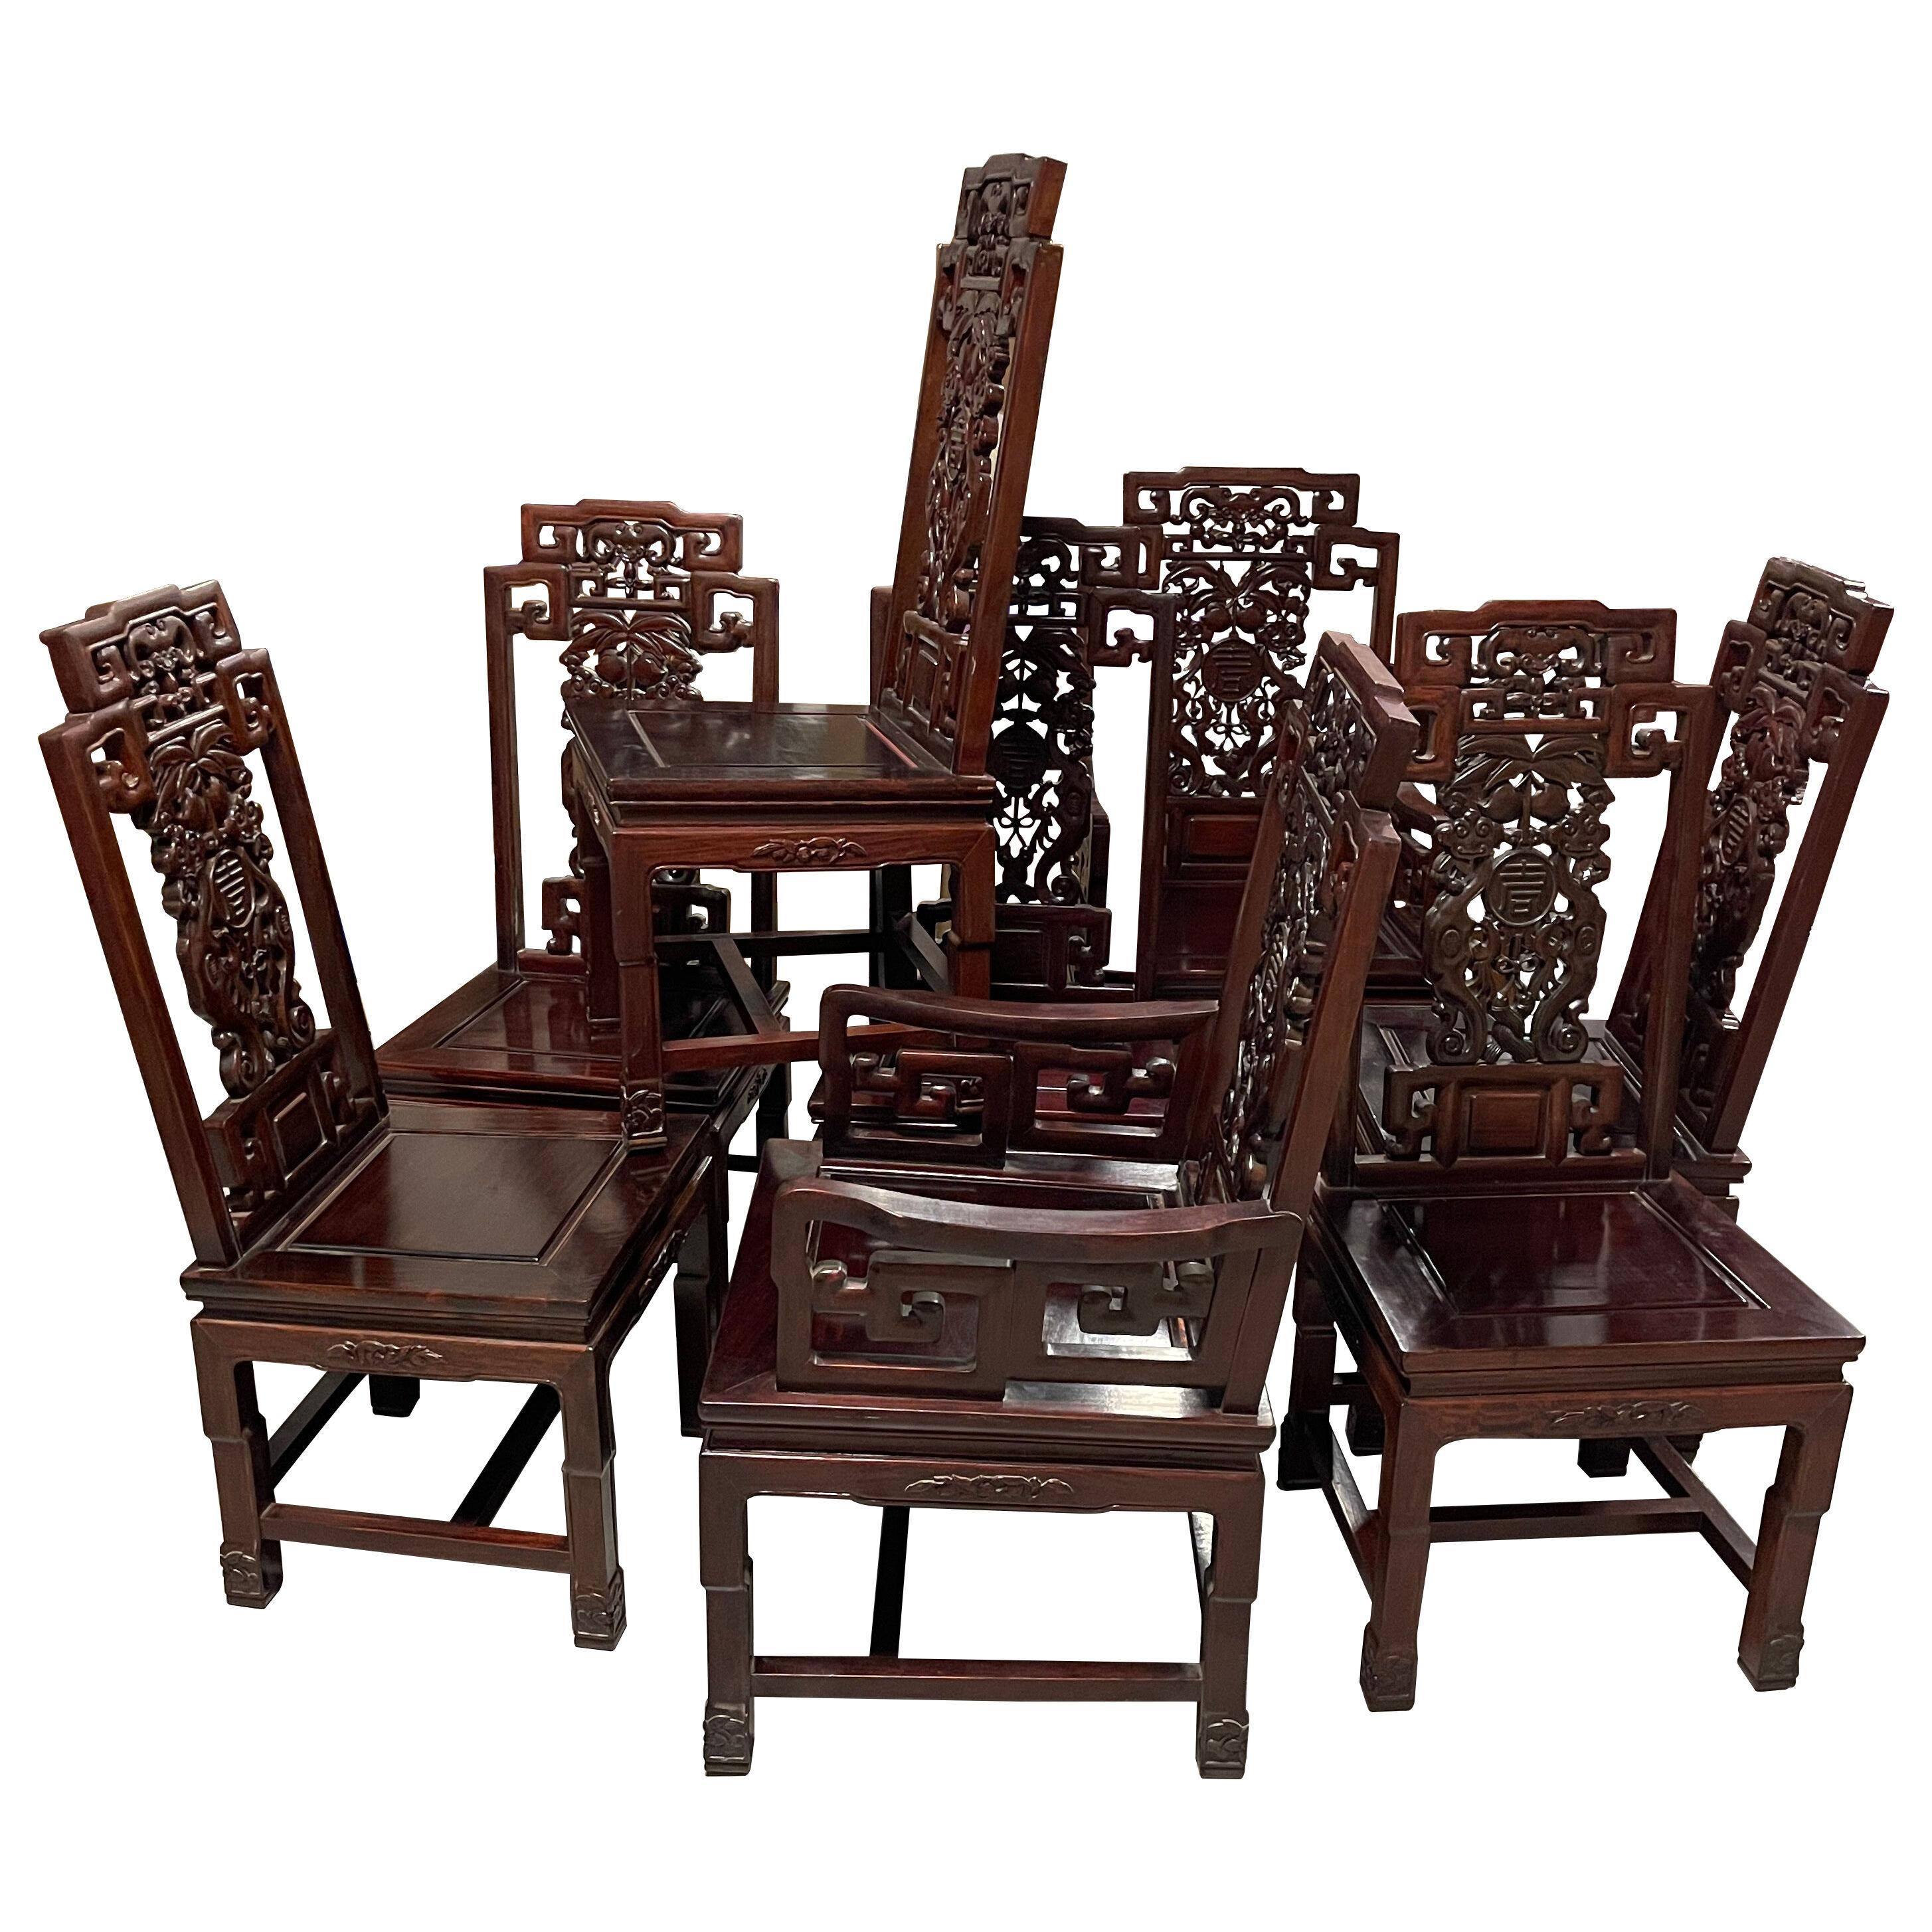 Set of 8 Carved Chinese Hardwood Chairs